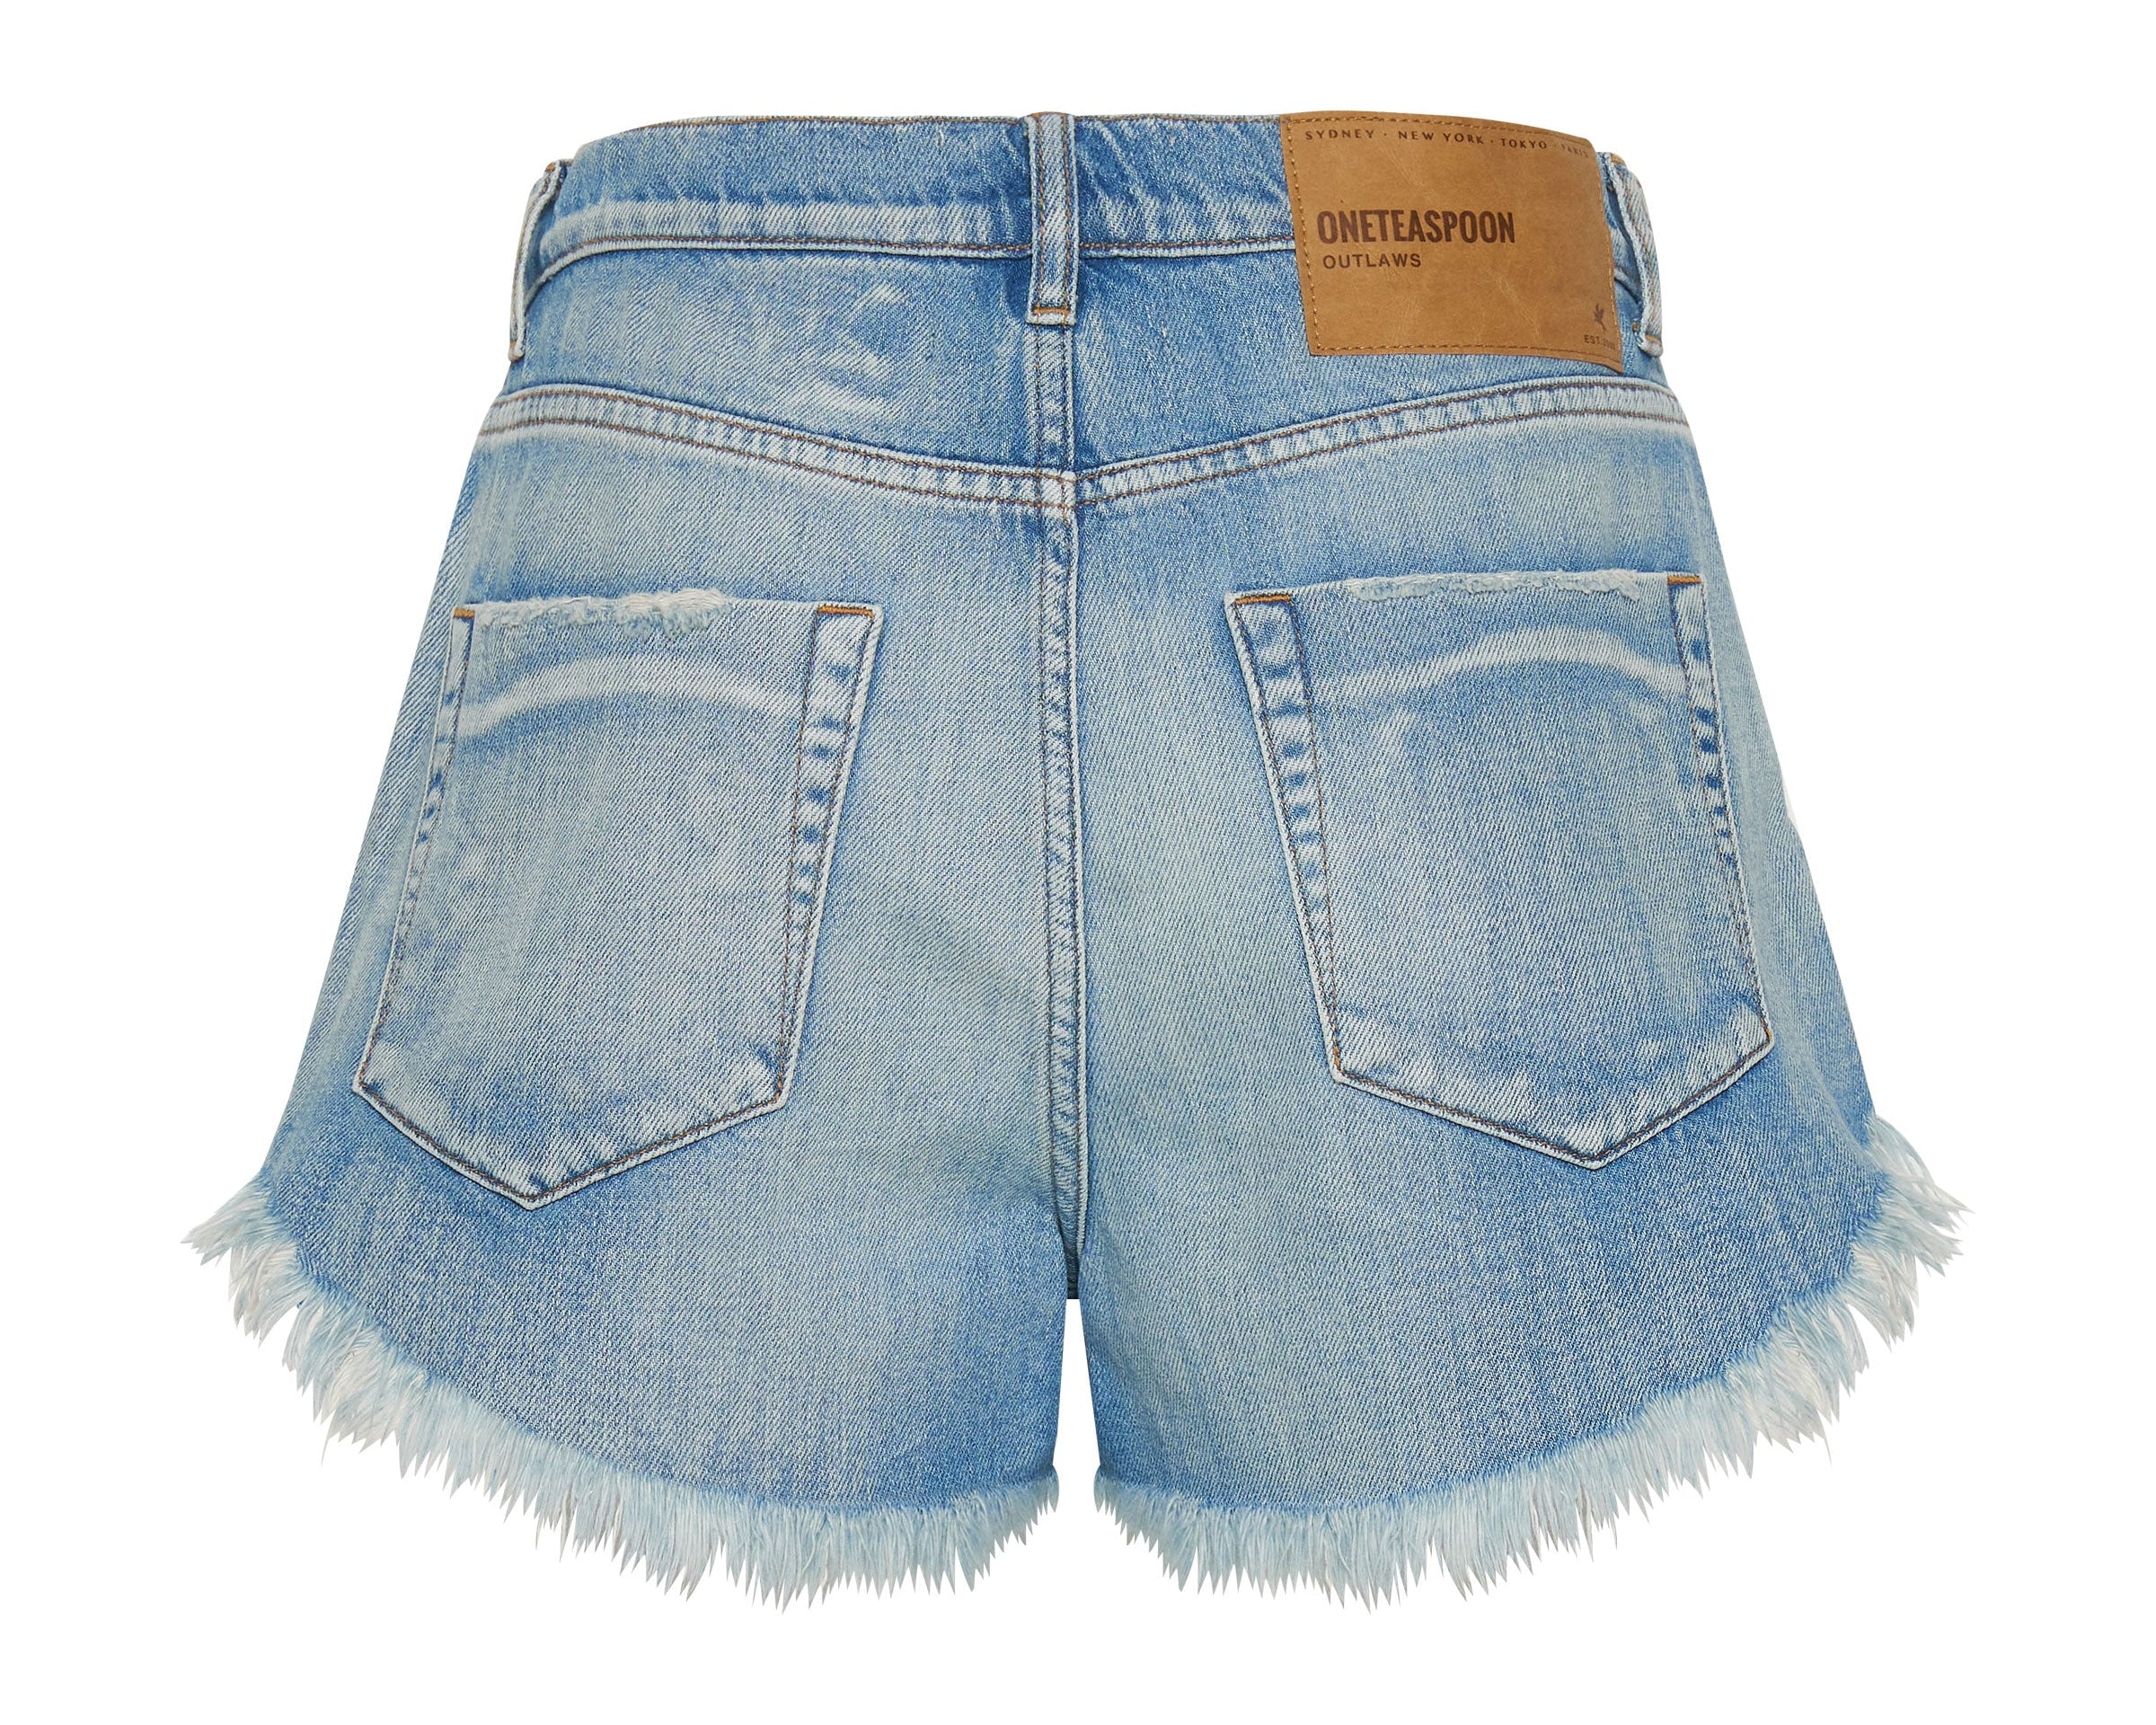 WORN OUT HENDRIXE OUTLAWS MID LENGTH DENIM SHORTS